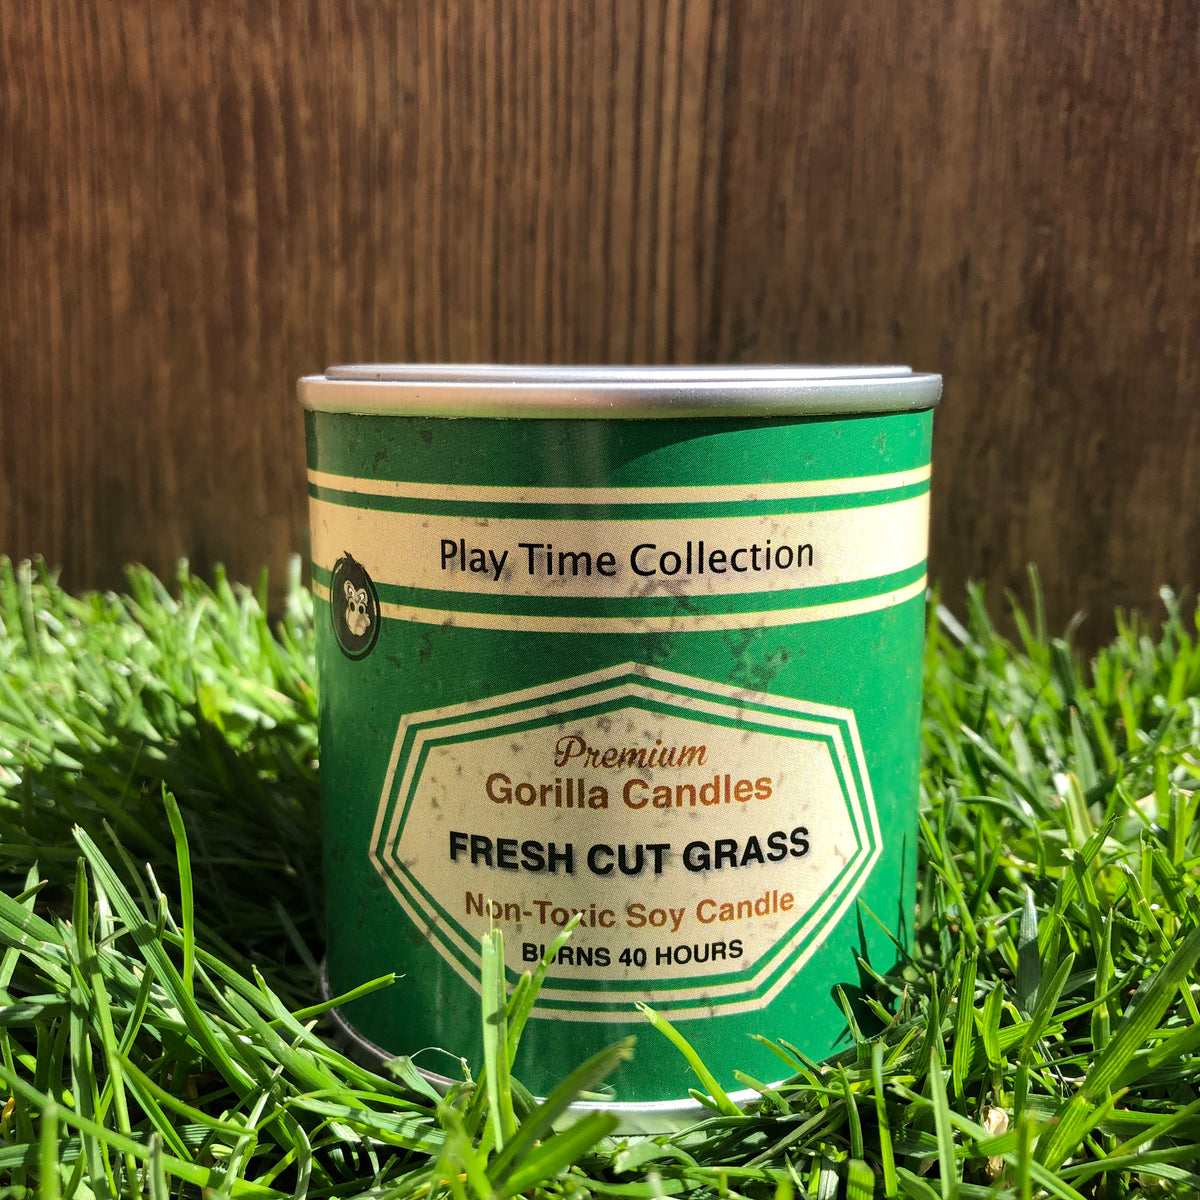 Smells like lawn mower? New manly-scented candles